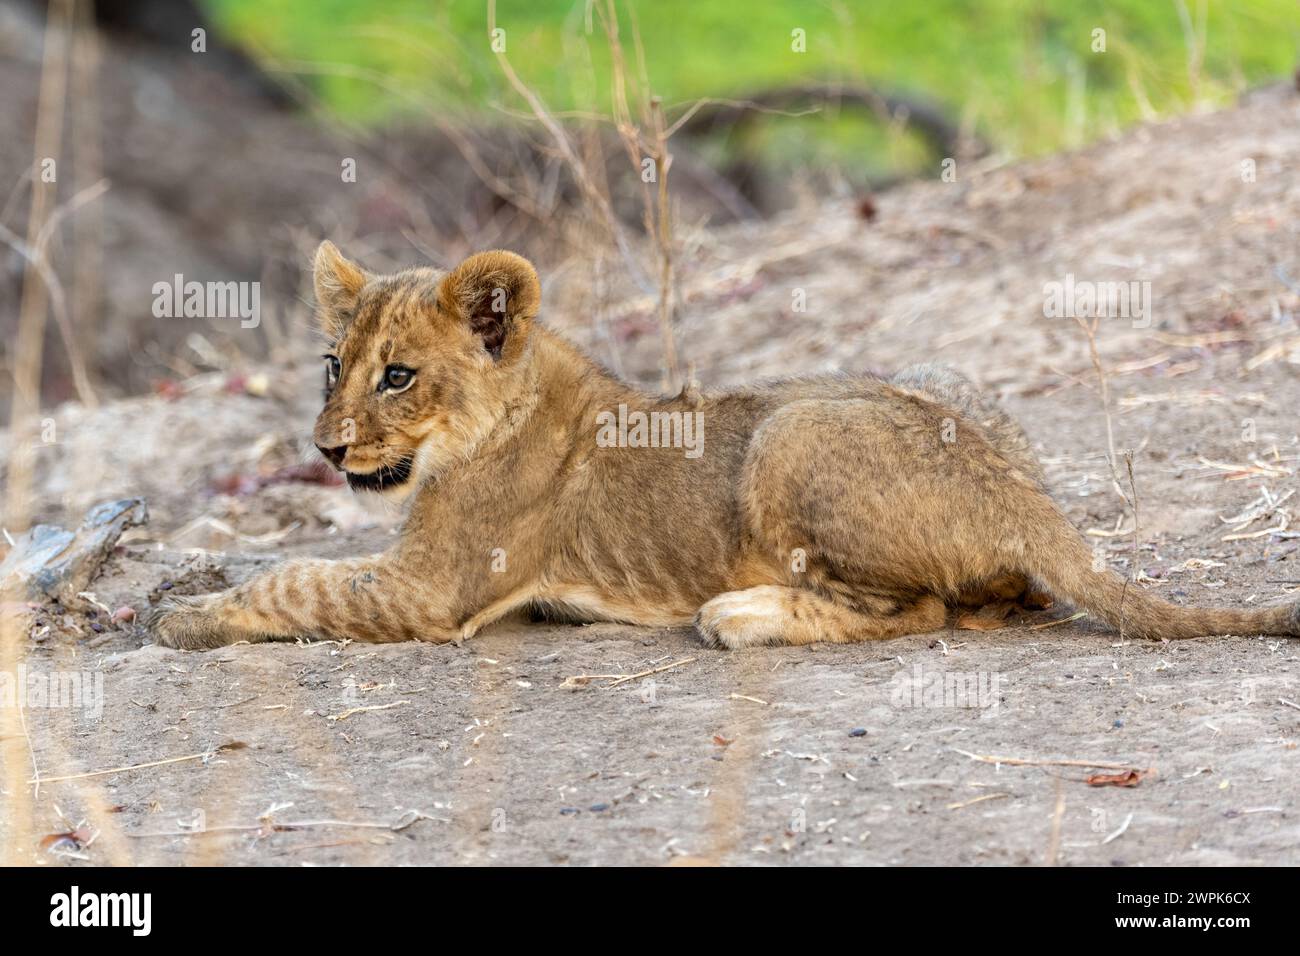 Lion Cub (Panthera leo) giace nel South Luangwa National Park in Zambia, Africa meridionale Foto Stock